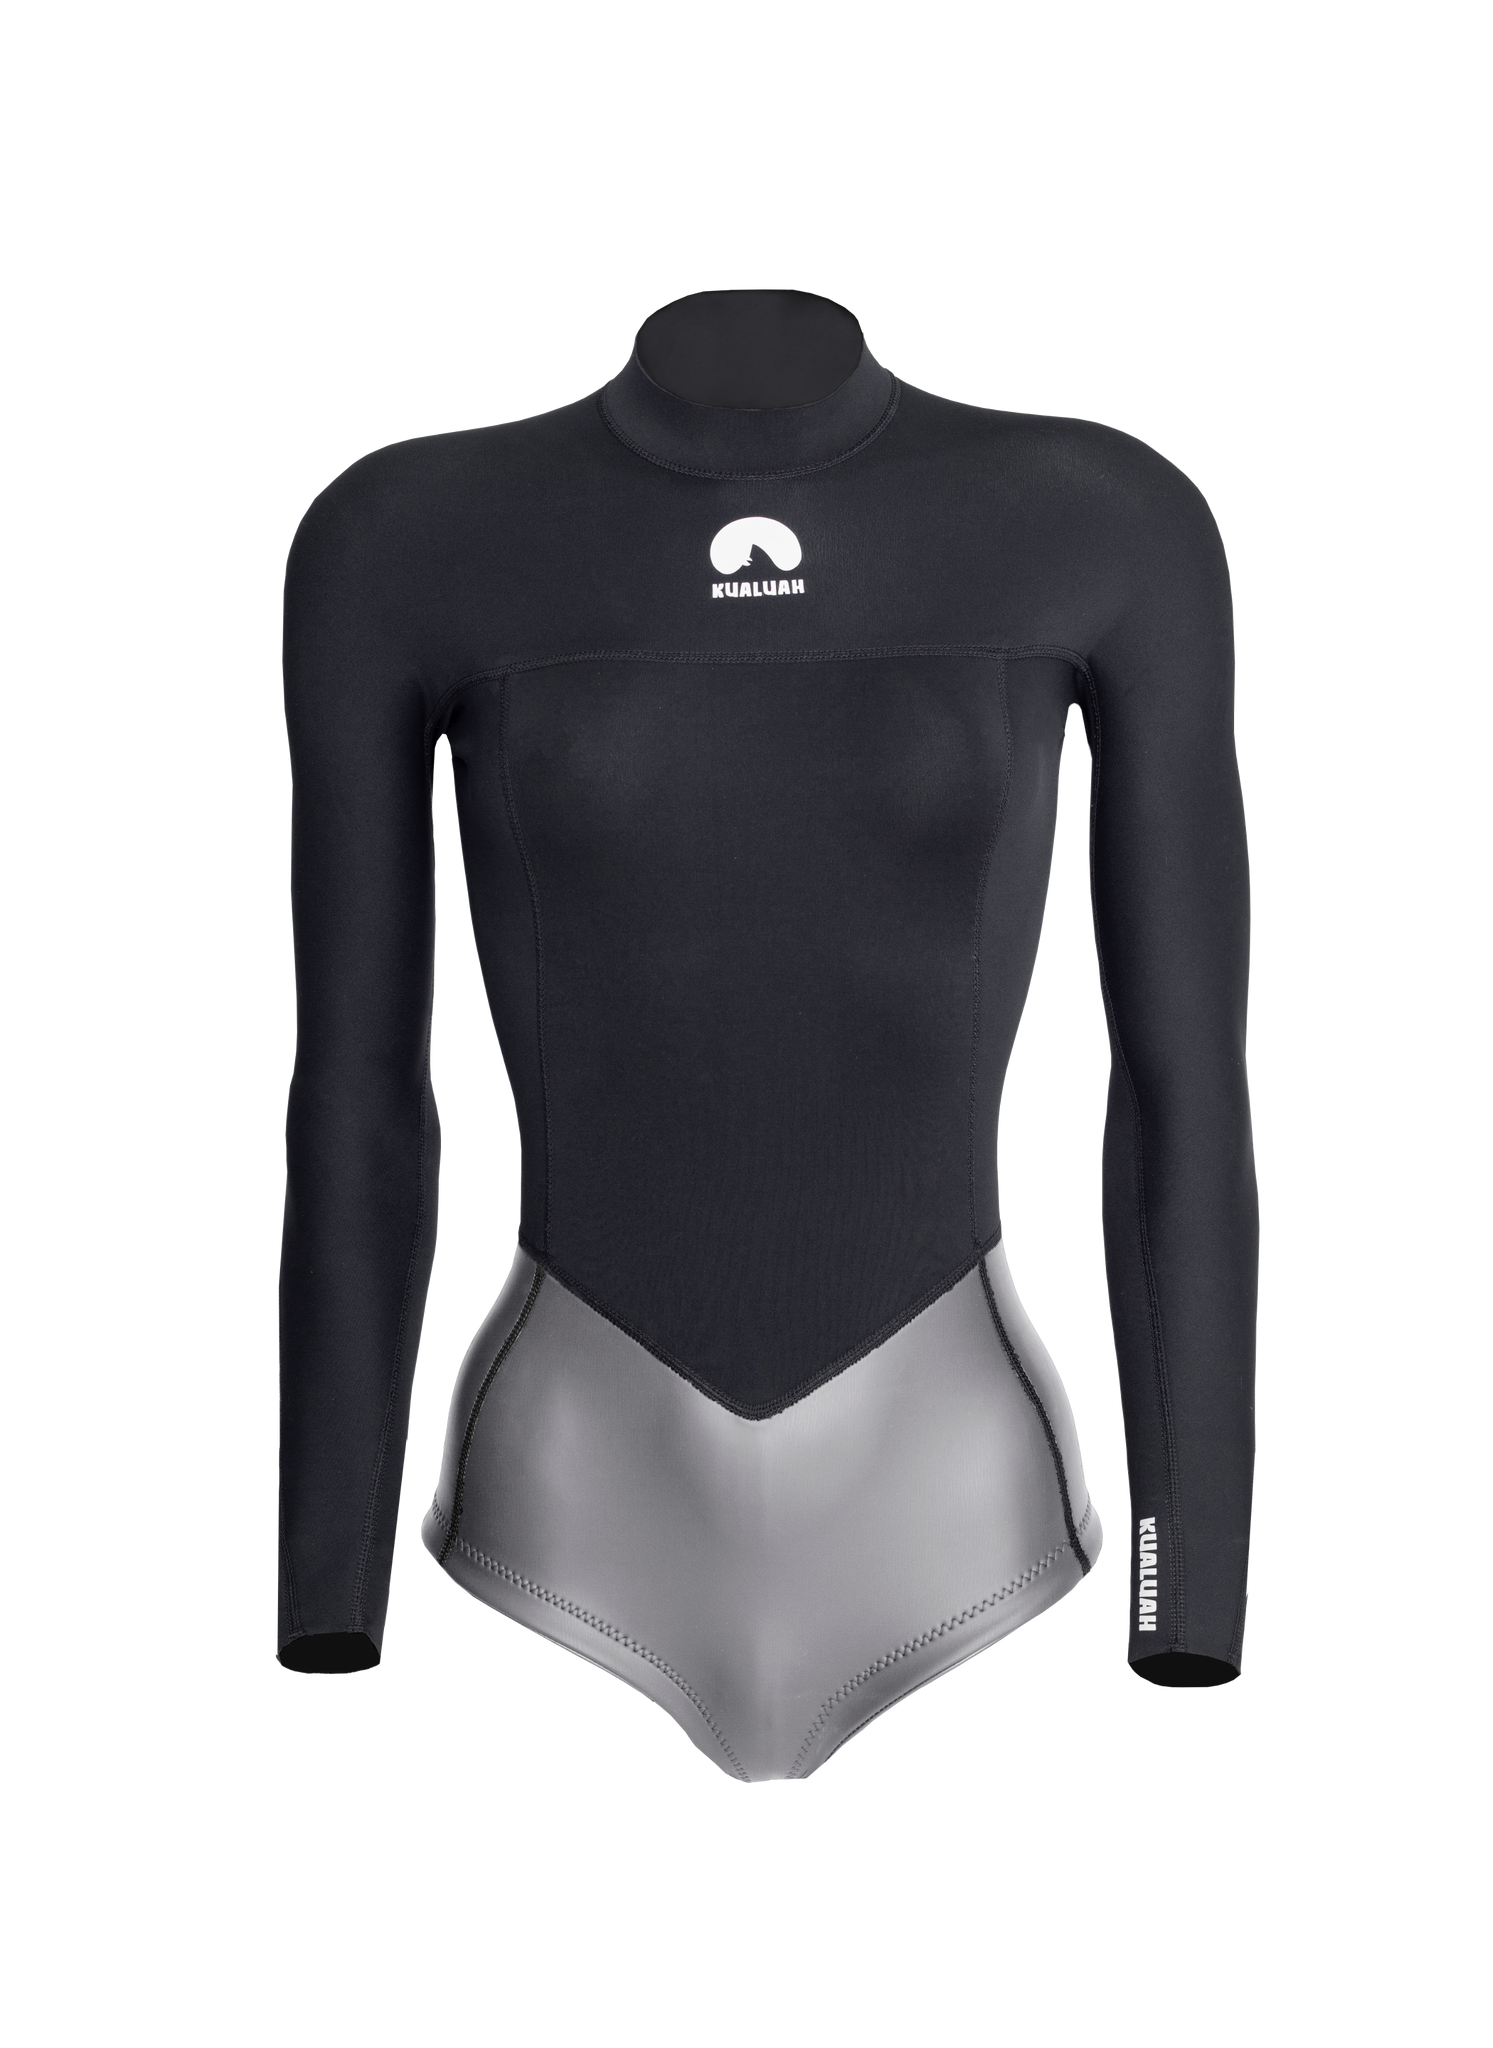 Kualuah neoprene Rangali springsuit / shorty. Keeping you warm while surfing, diving, kiteboarding and wakeboarding . Wear it with our leggings and jacket to explore our oceans, coler waters. This short wetsuit is made out of limestone neoprene. In black and silver colors